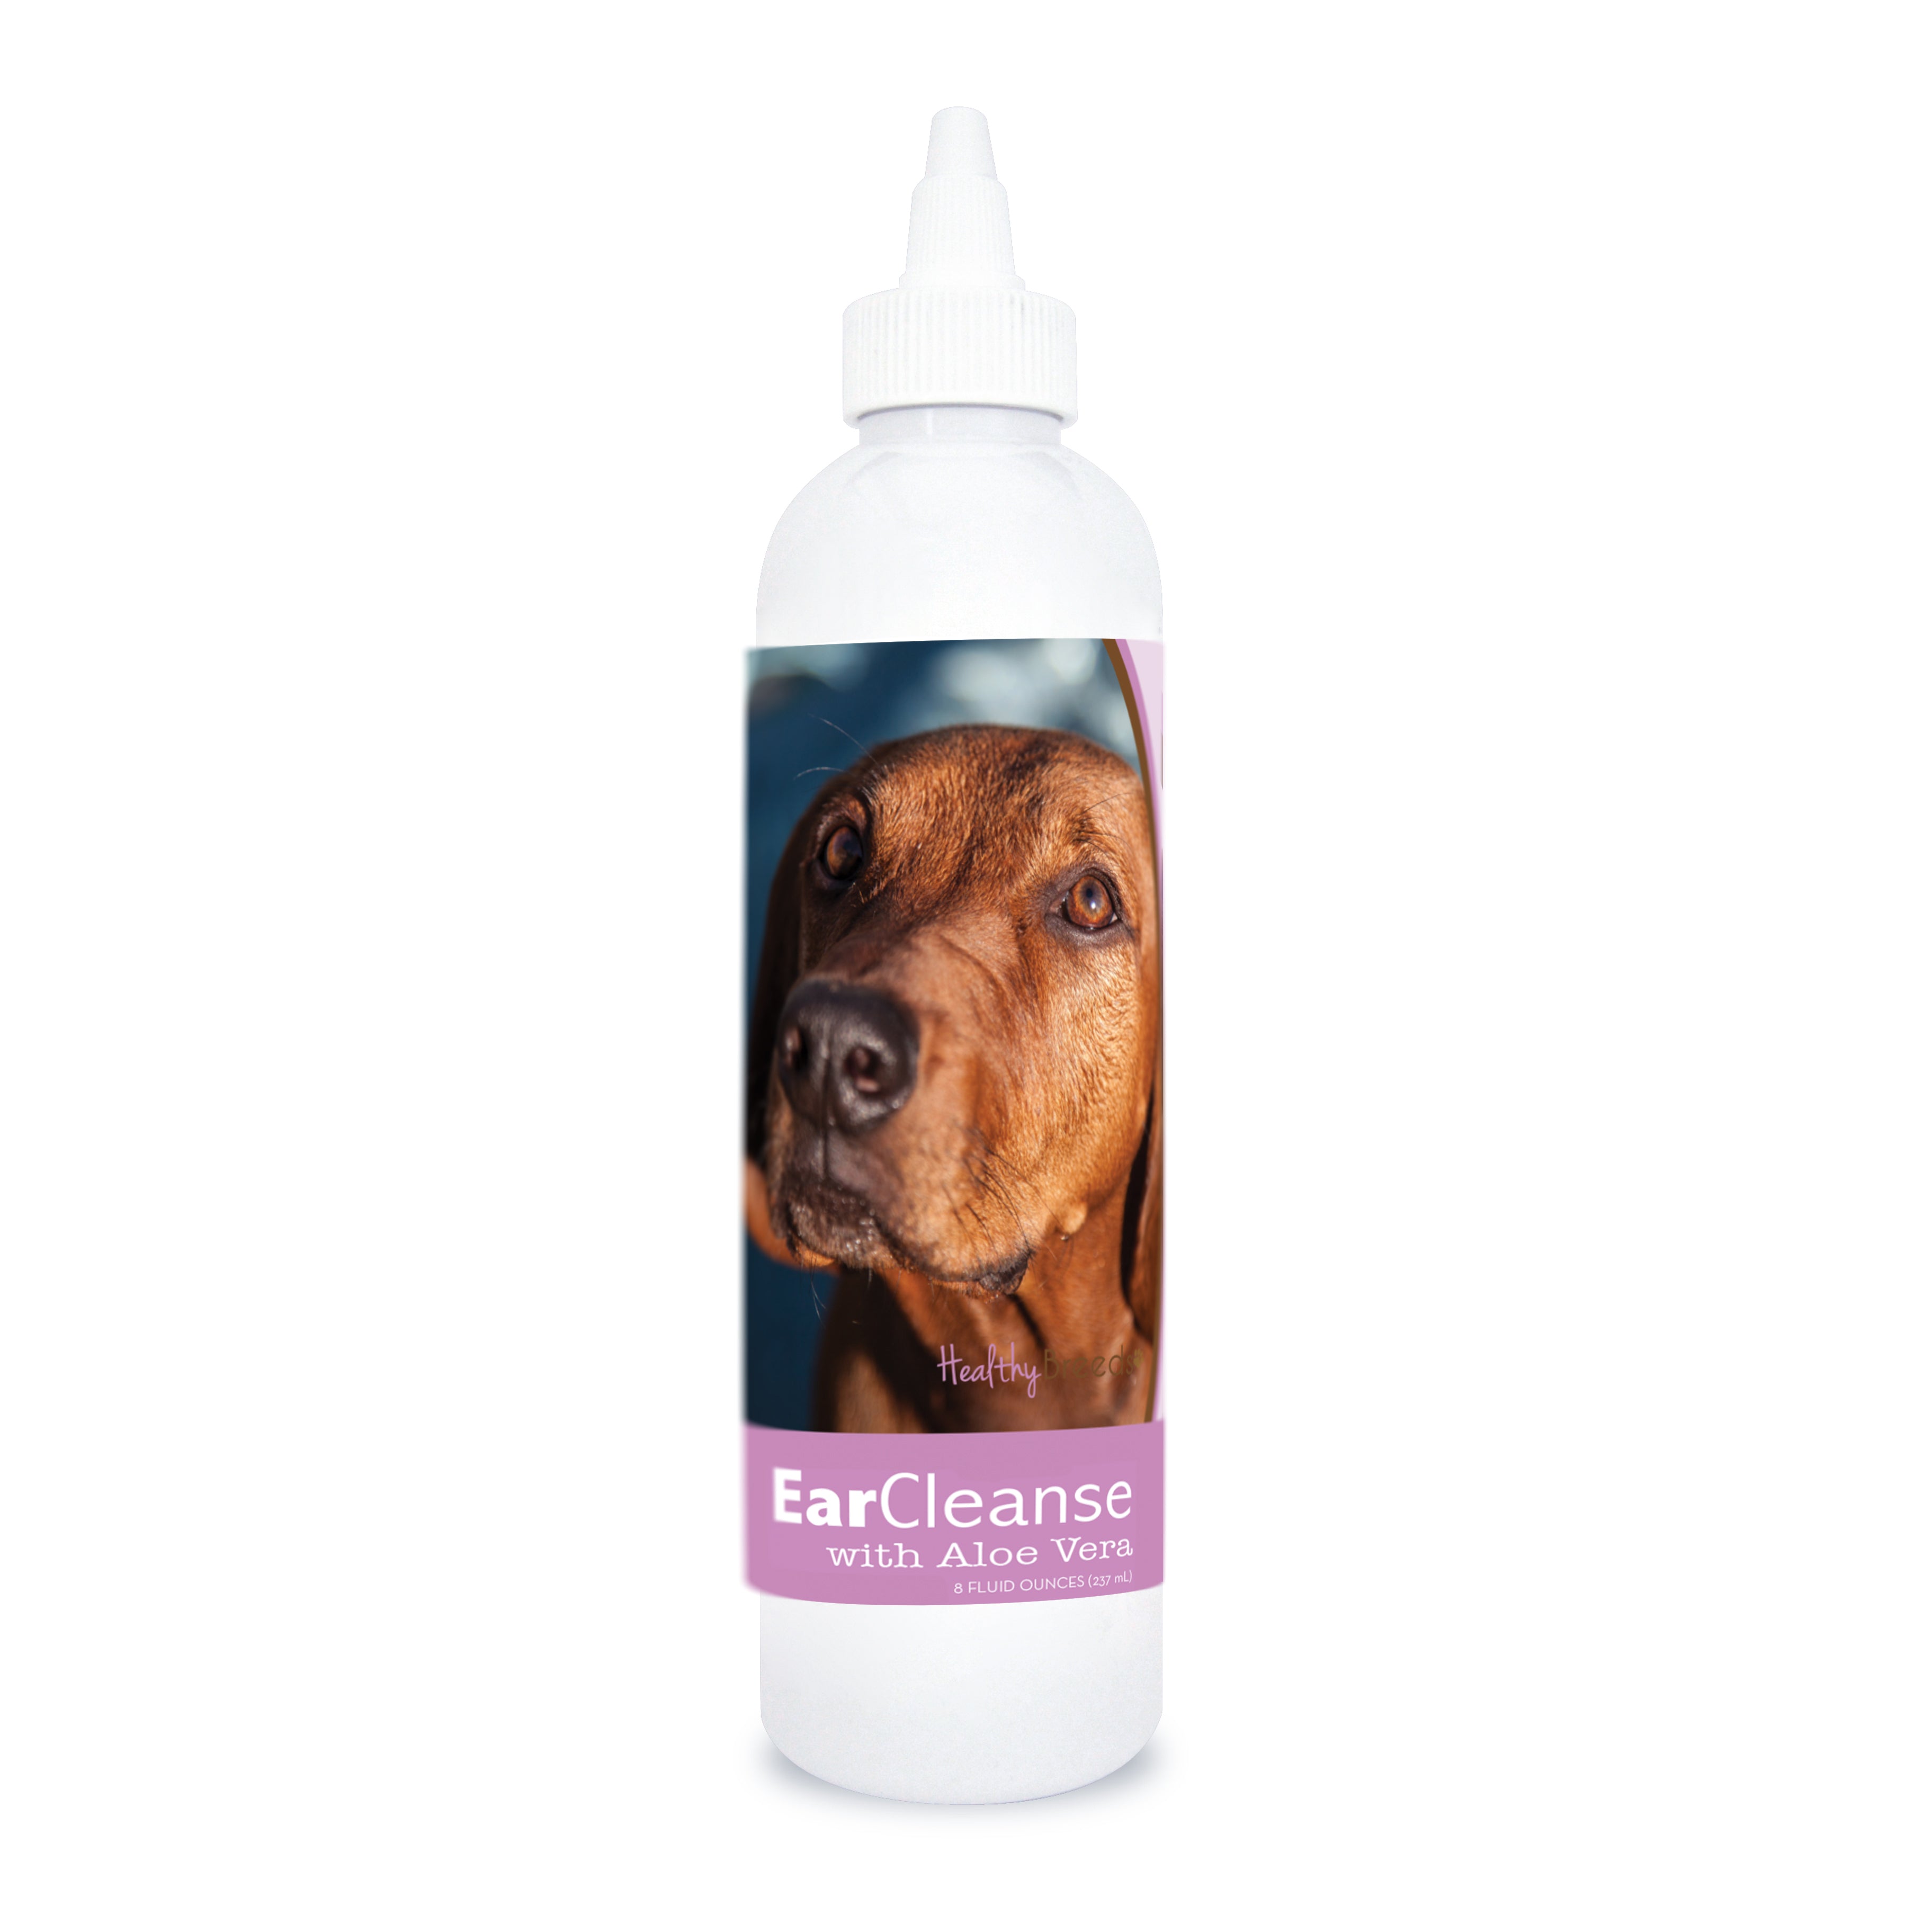 Redbone Coonhound Ear Cleanse with Aloe Vera Sweet Pea and Vanilla 8 oz